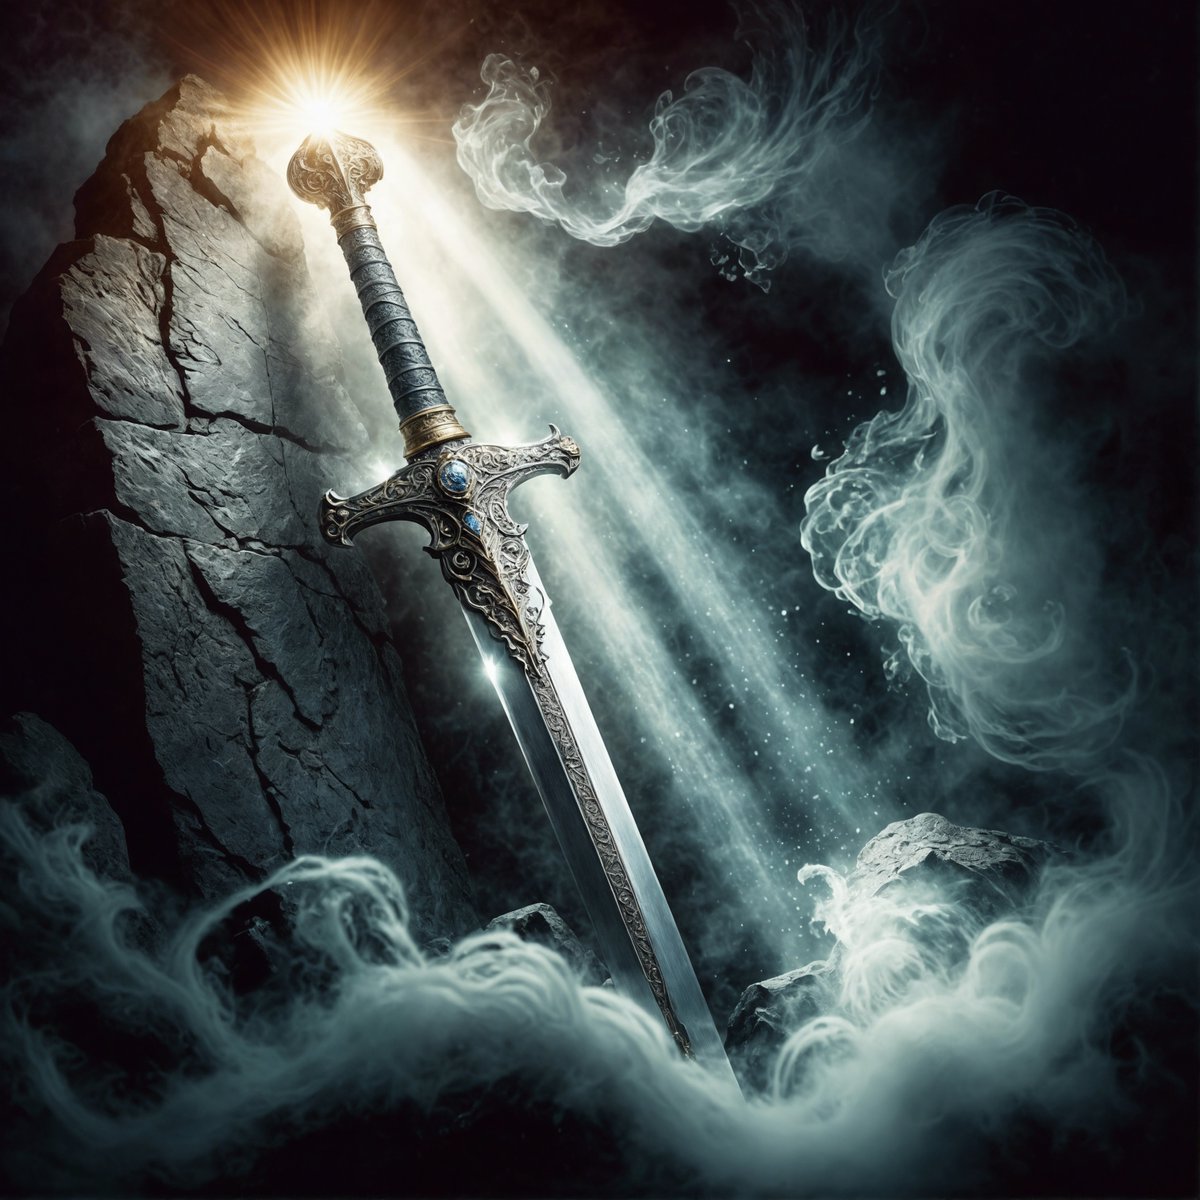 'Here, my son, take Excalibur, This blade, this shaft of light, Take and wield it with a valiant heart, For it shall lead you in the fight.'